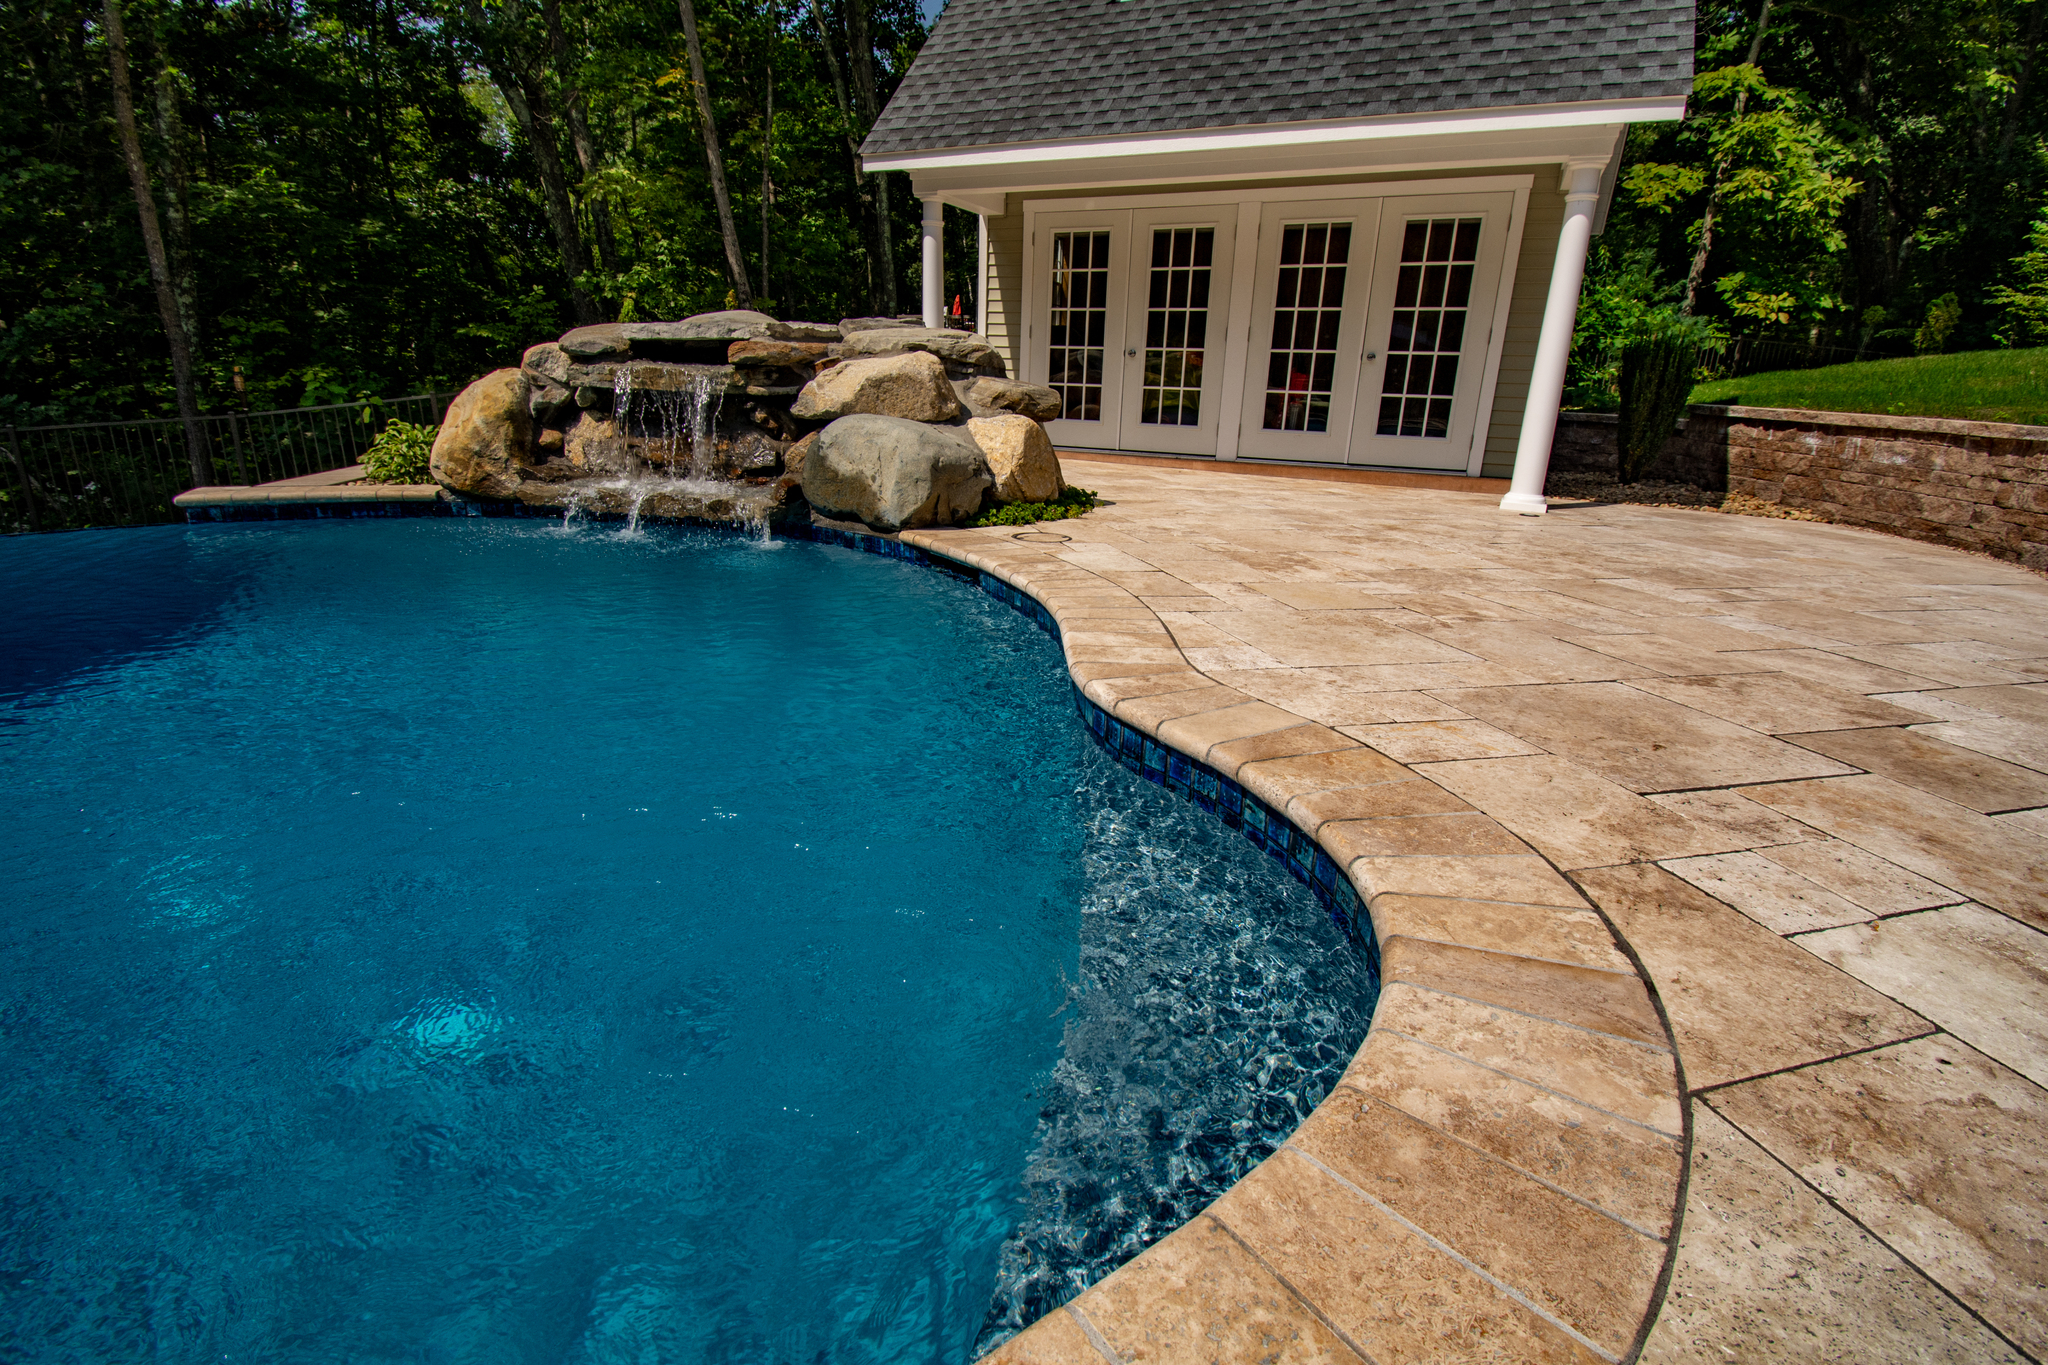 Pool Coping Tile Triad Associates, Can You Use Regular Tile In A Pool